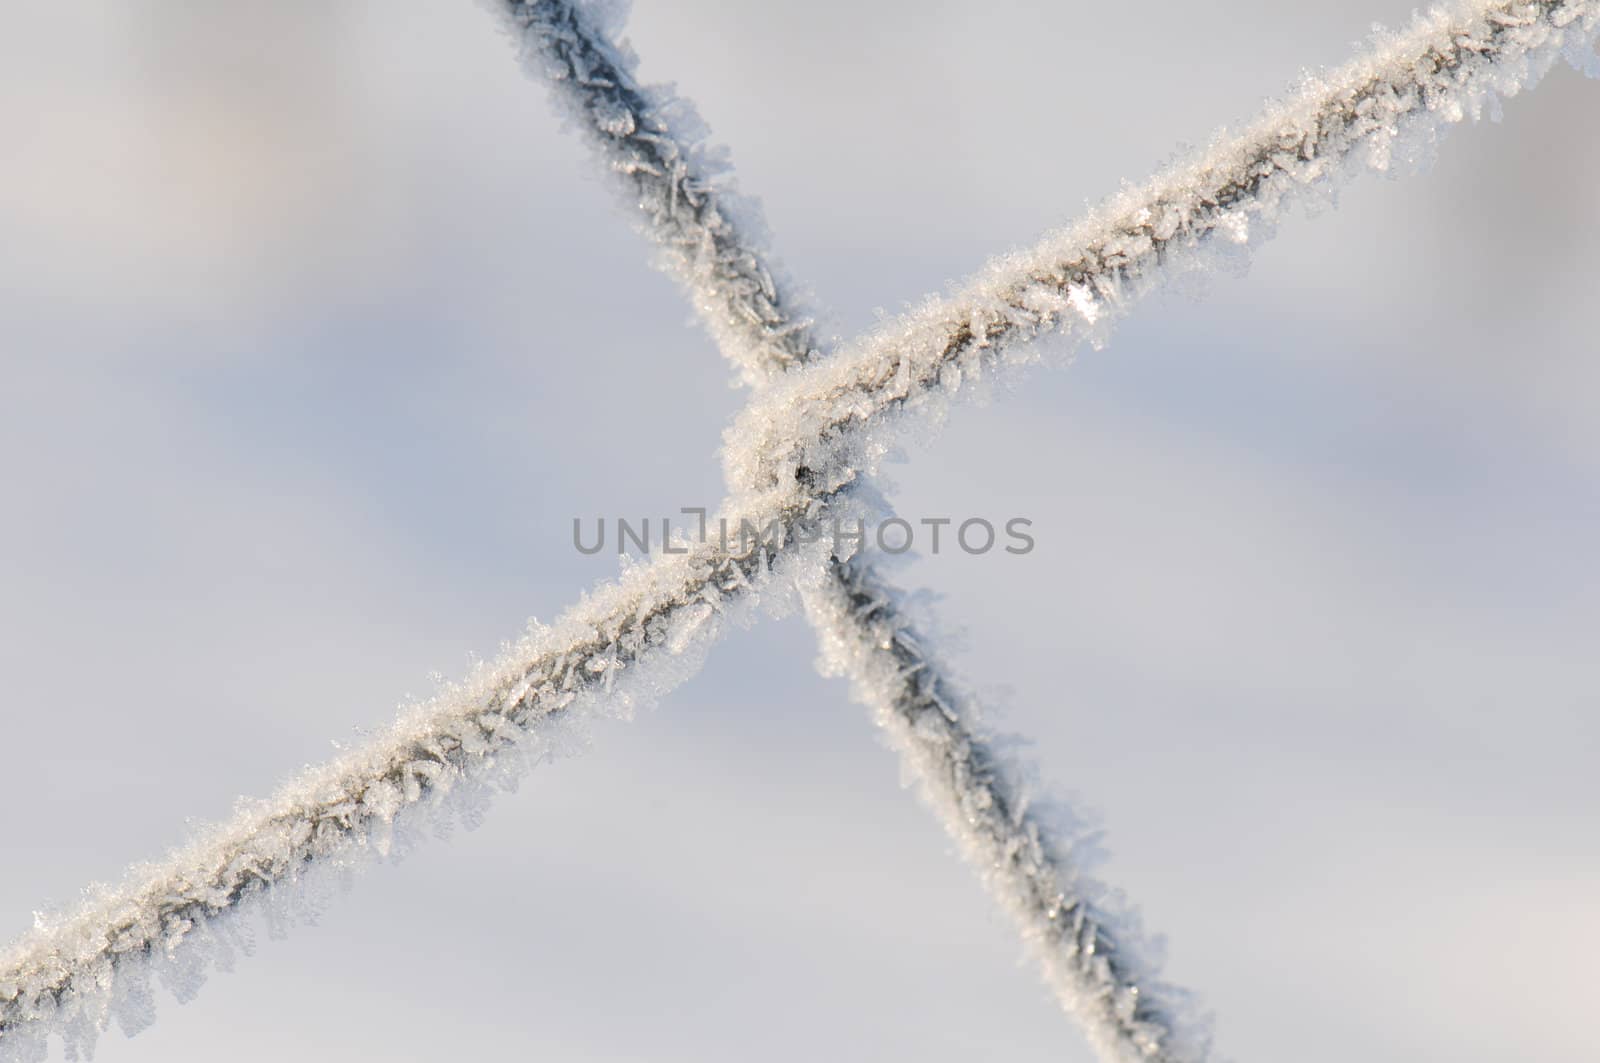 Frost on a wire fence in close-up